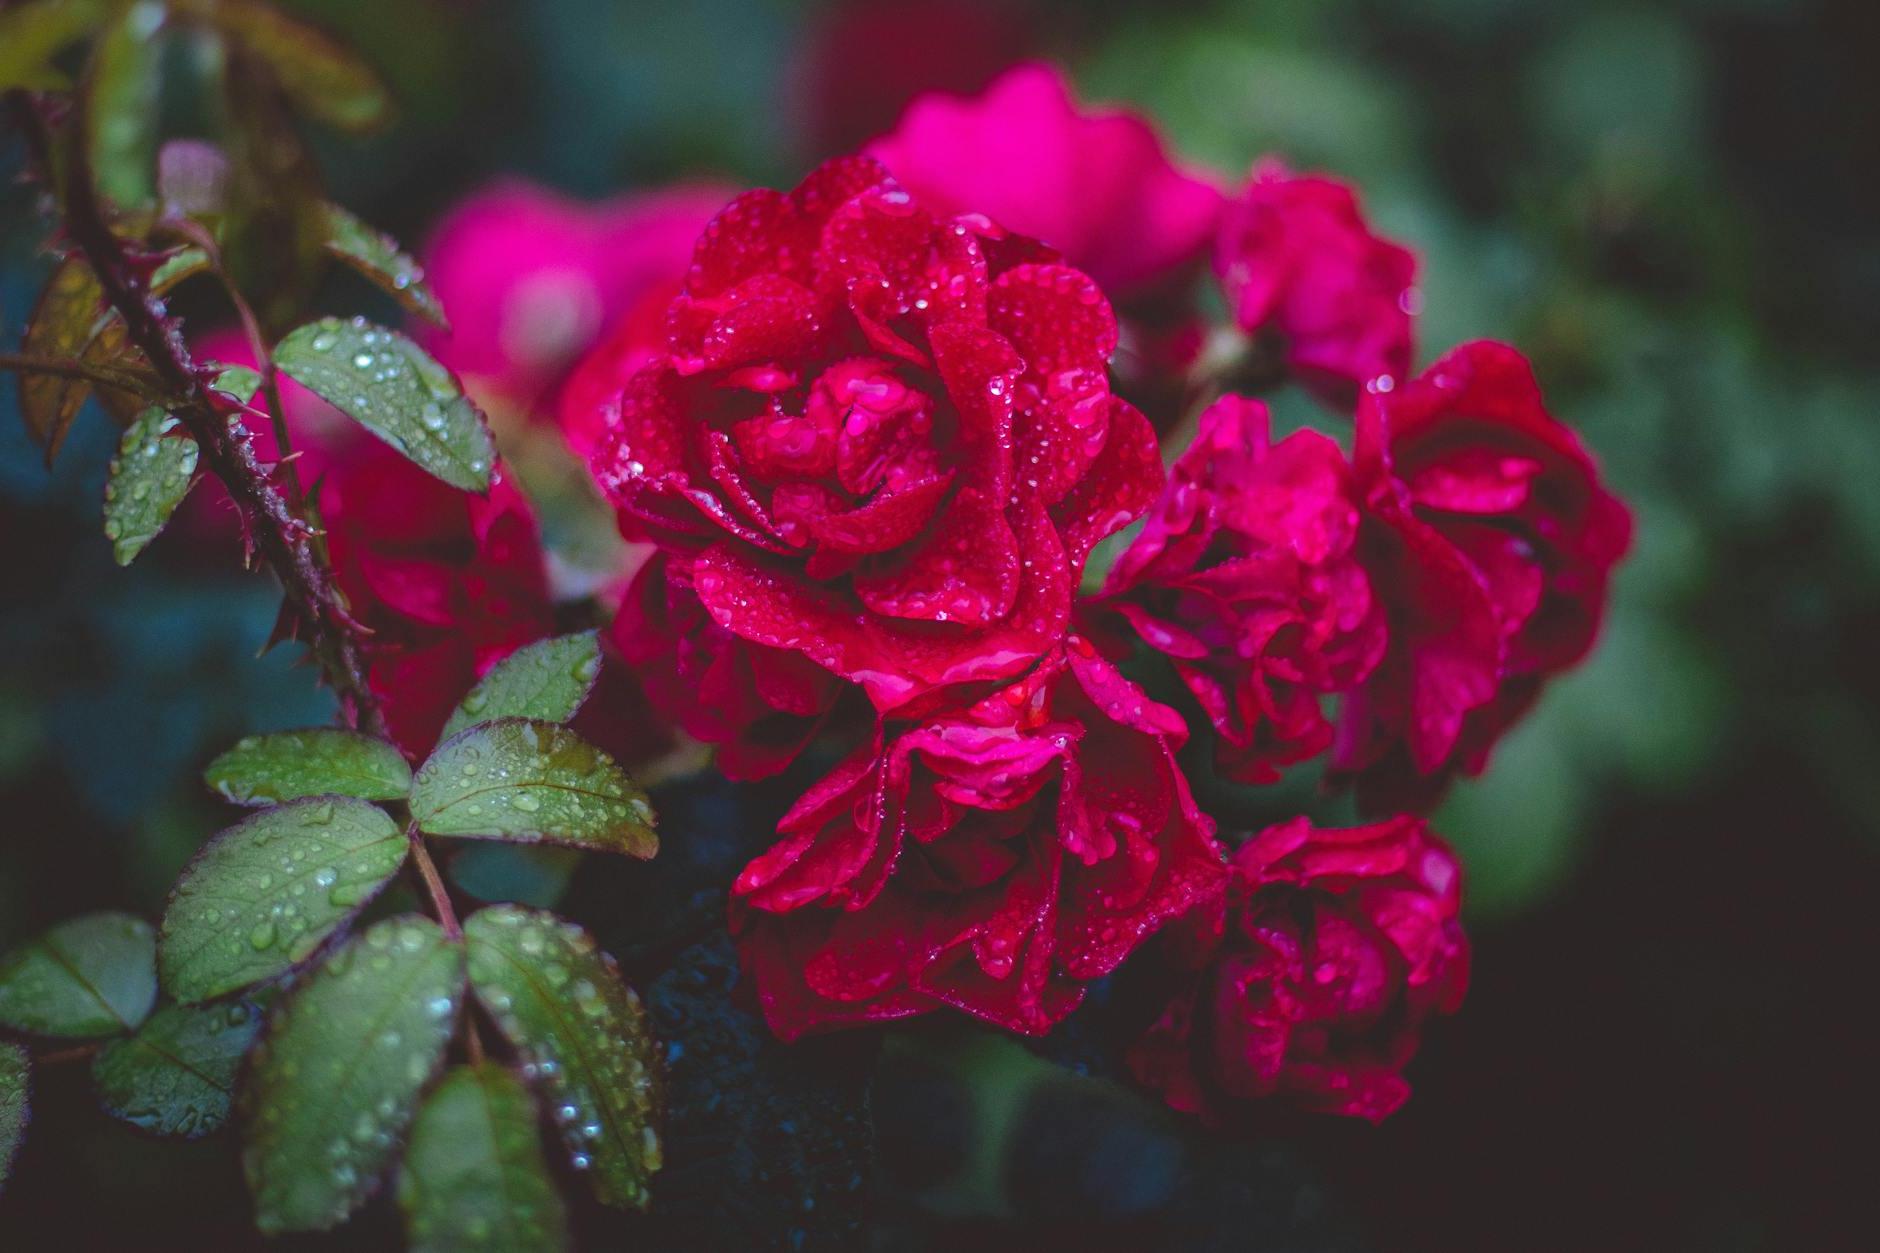 Photography of Red Roses